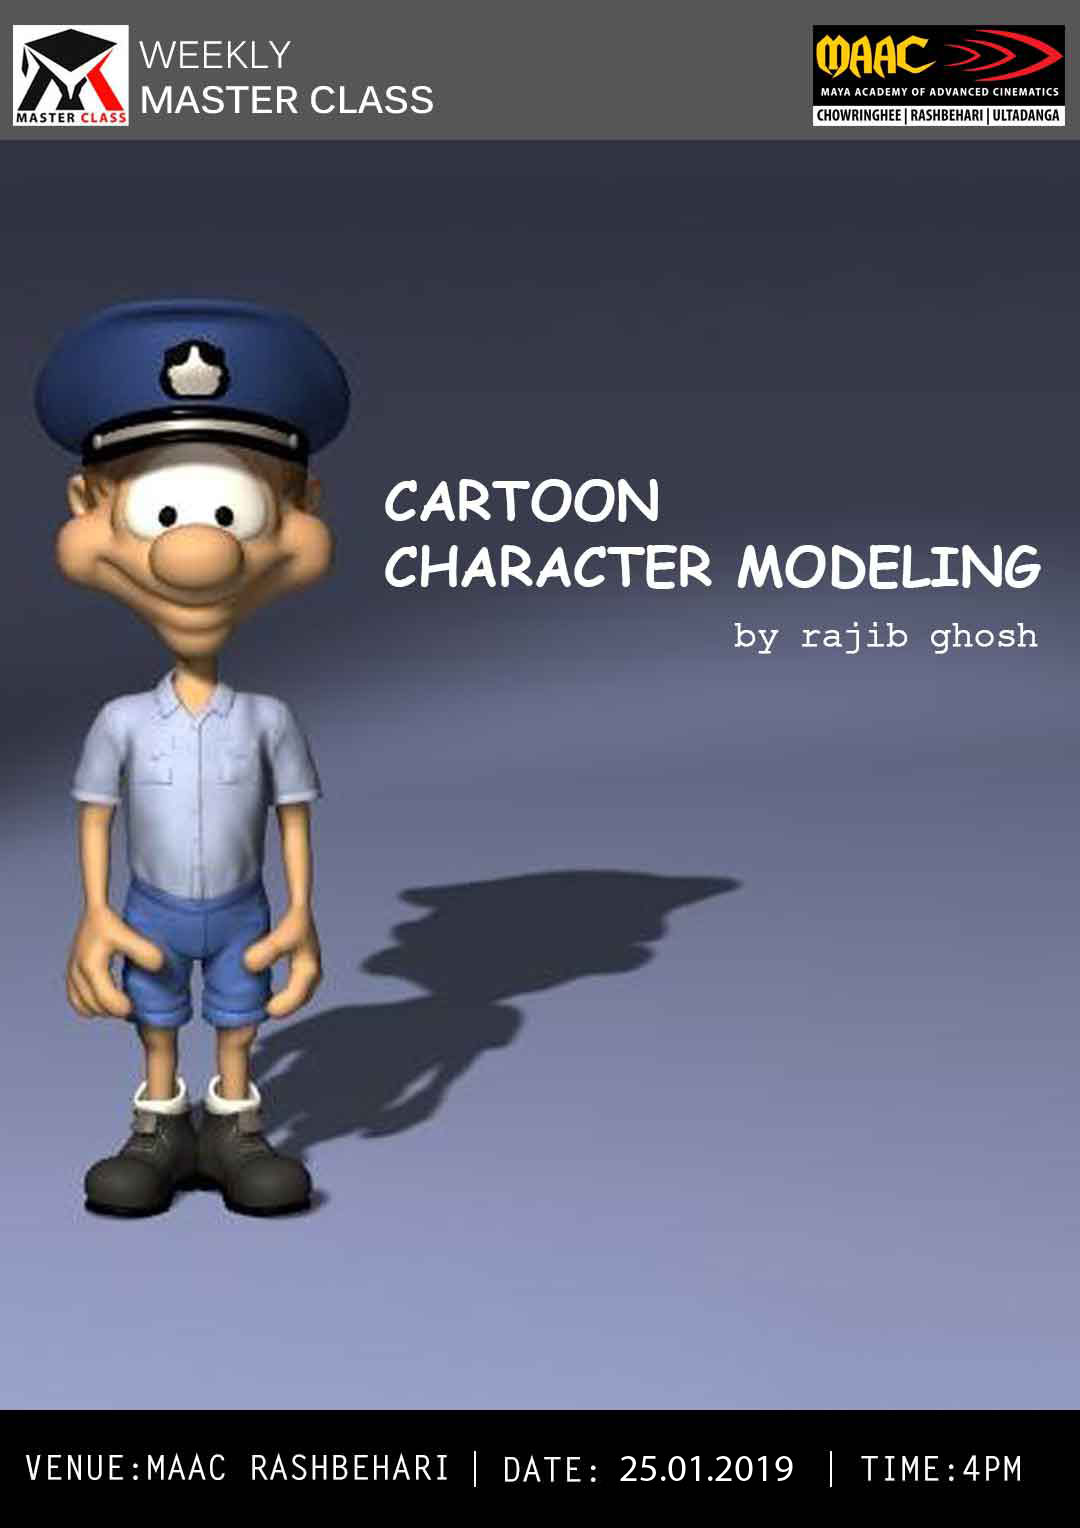 Weekly Master Class on Cartoon Character Modeling